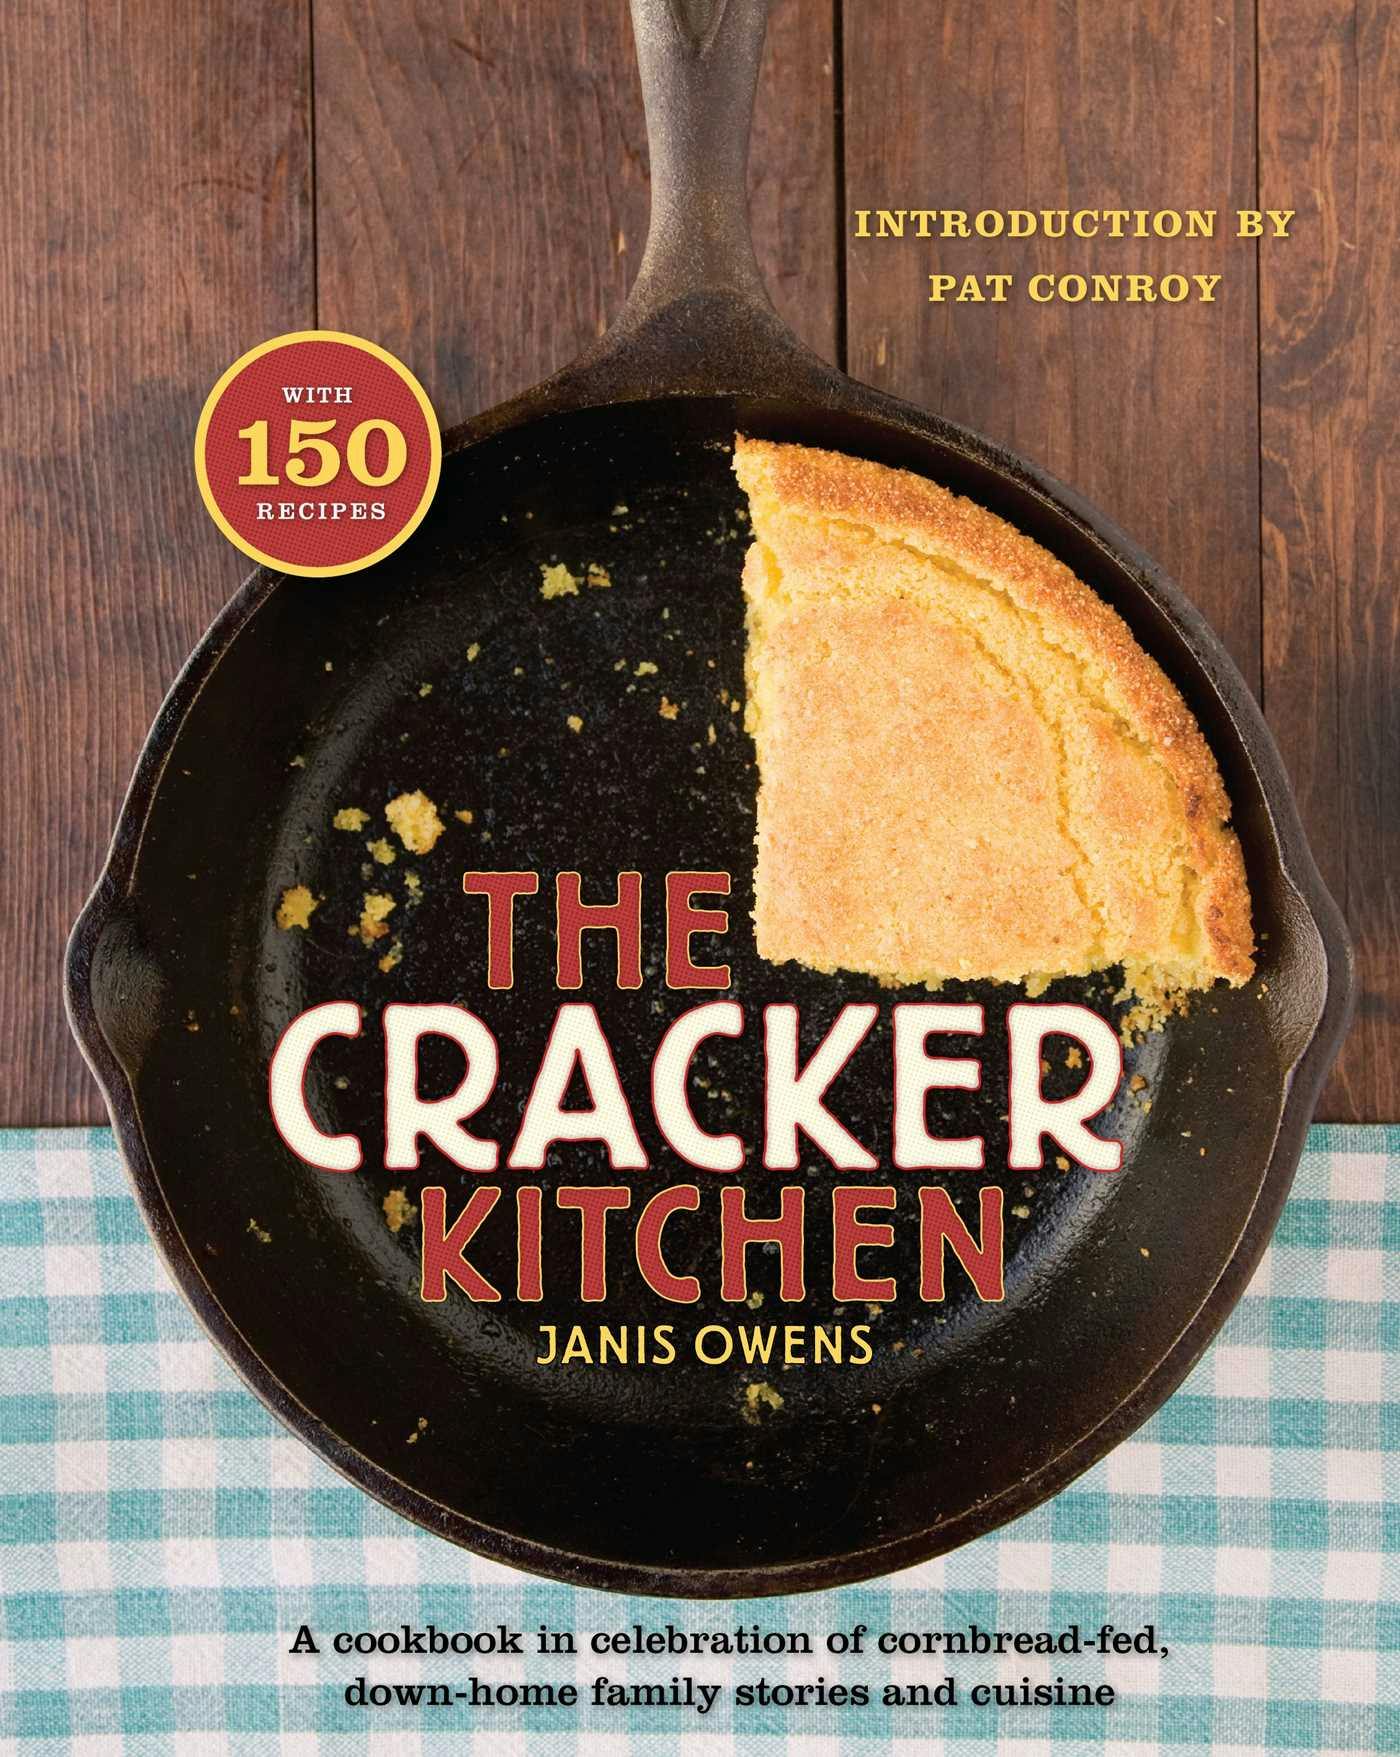 The Cracker Kitchen: A Cookbook in Celebration of Cornbread-Fed, Down Home Family Stories and Cuisine - Janis Owens